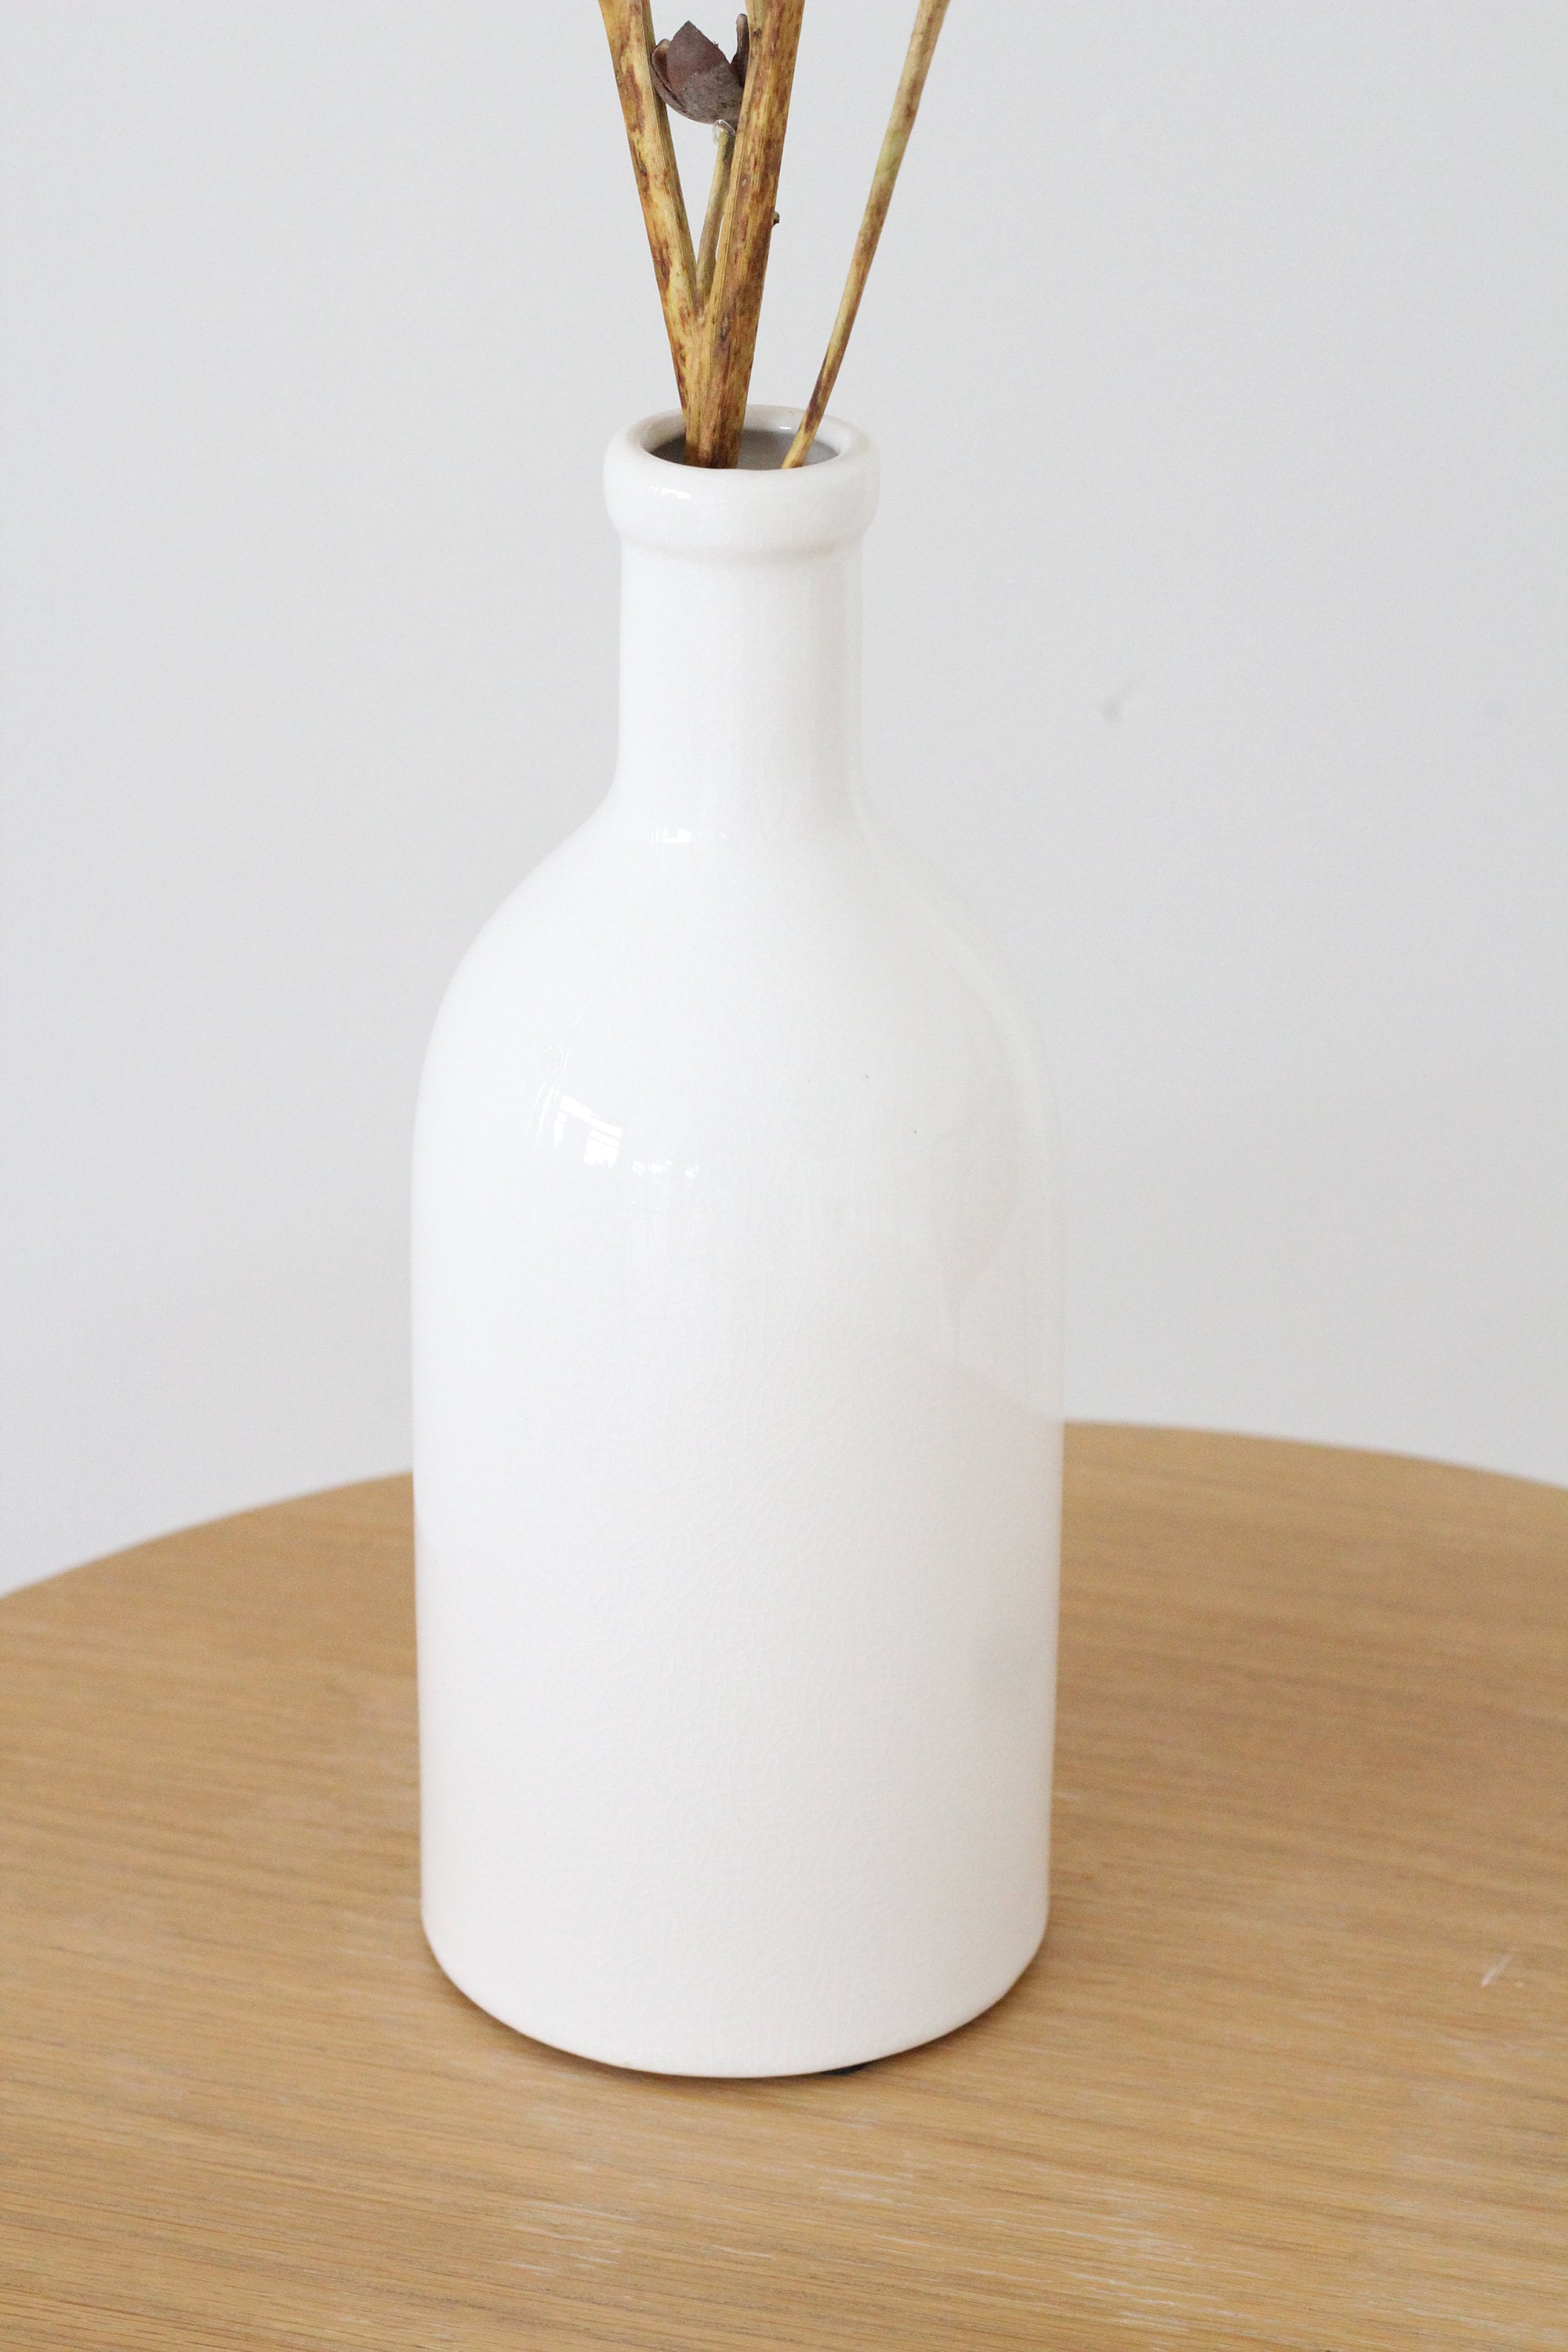 Crackle Glaze Minimalist White Bud Vases for Dried and Fresh Flowers